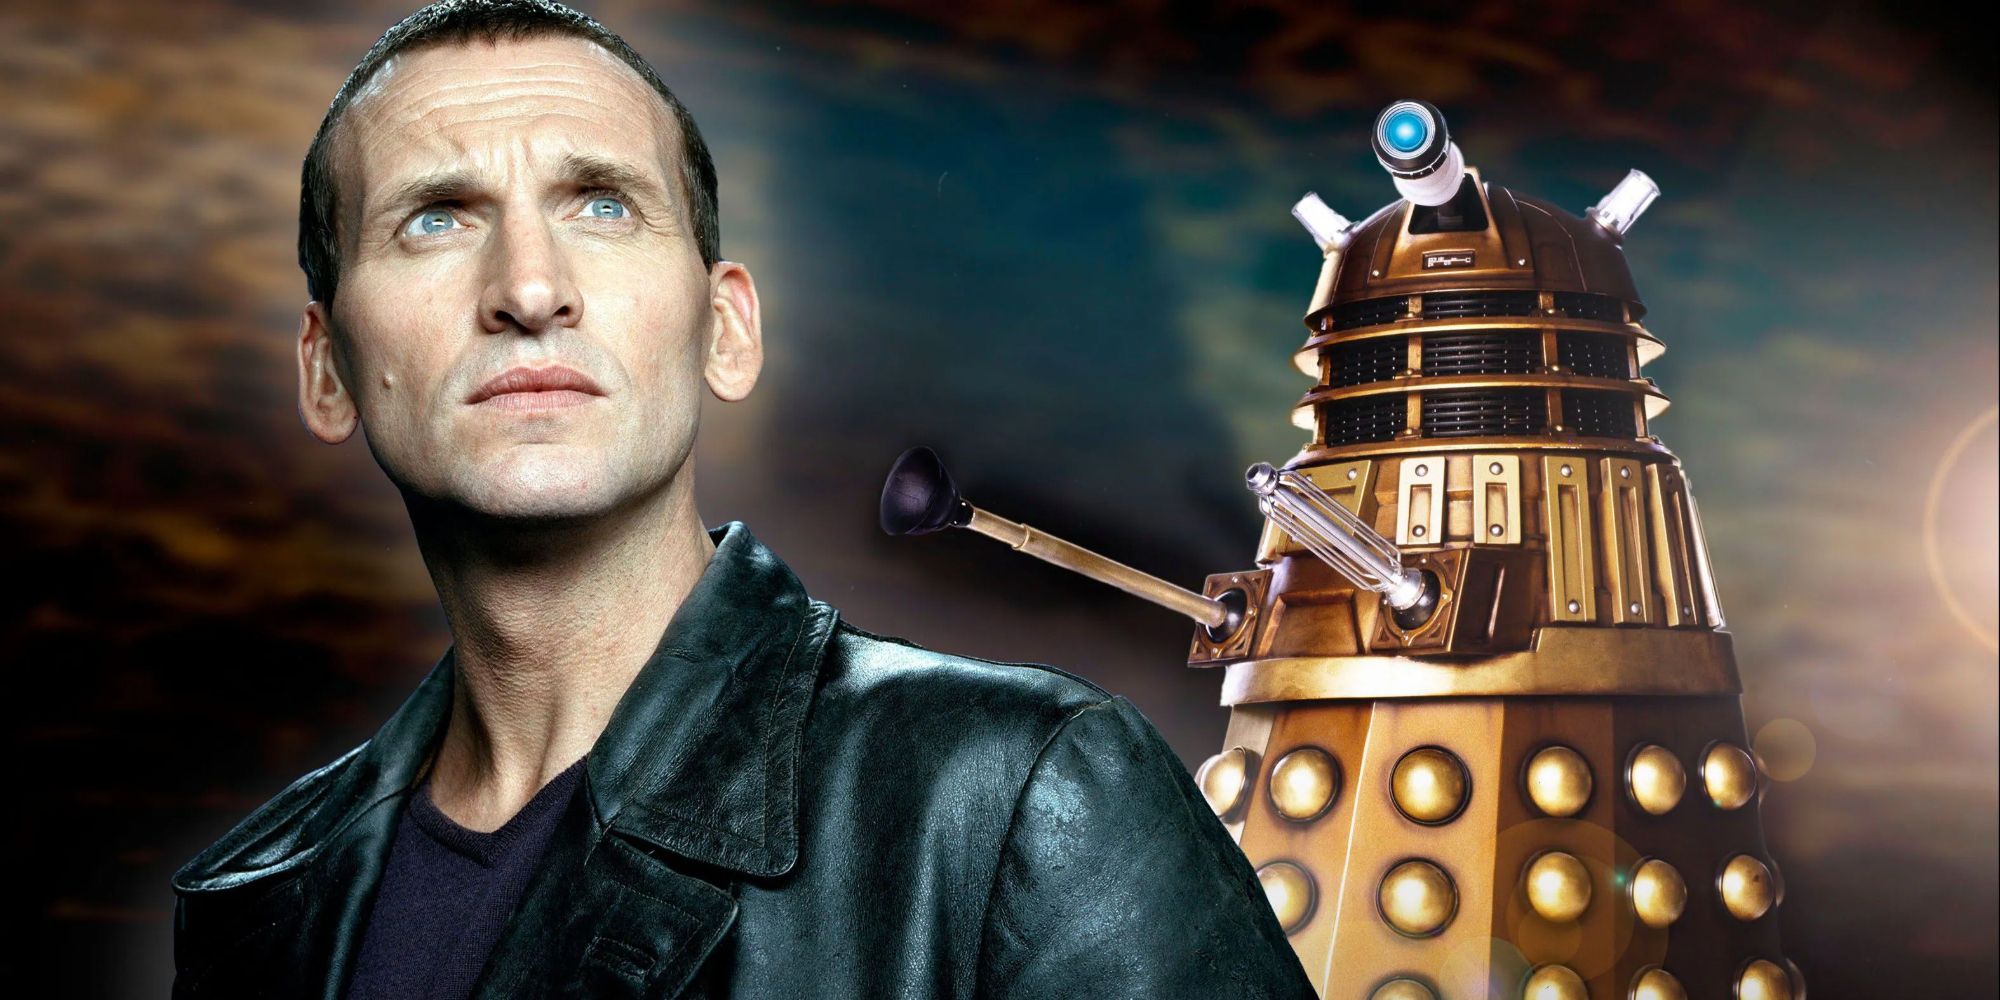 Doctor Who Chris Eccleston in front of a gold Dalek